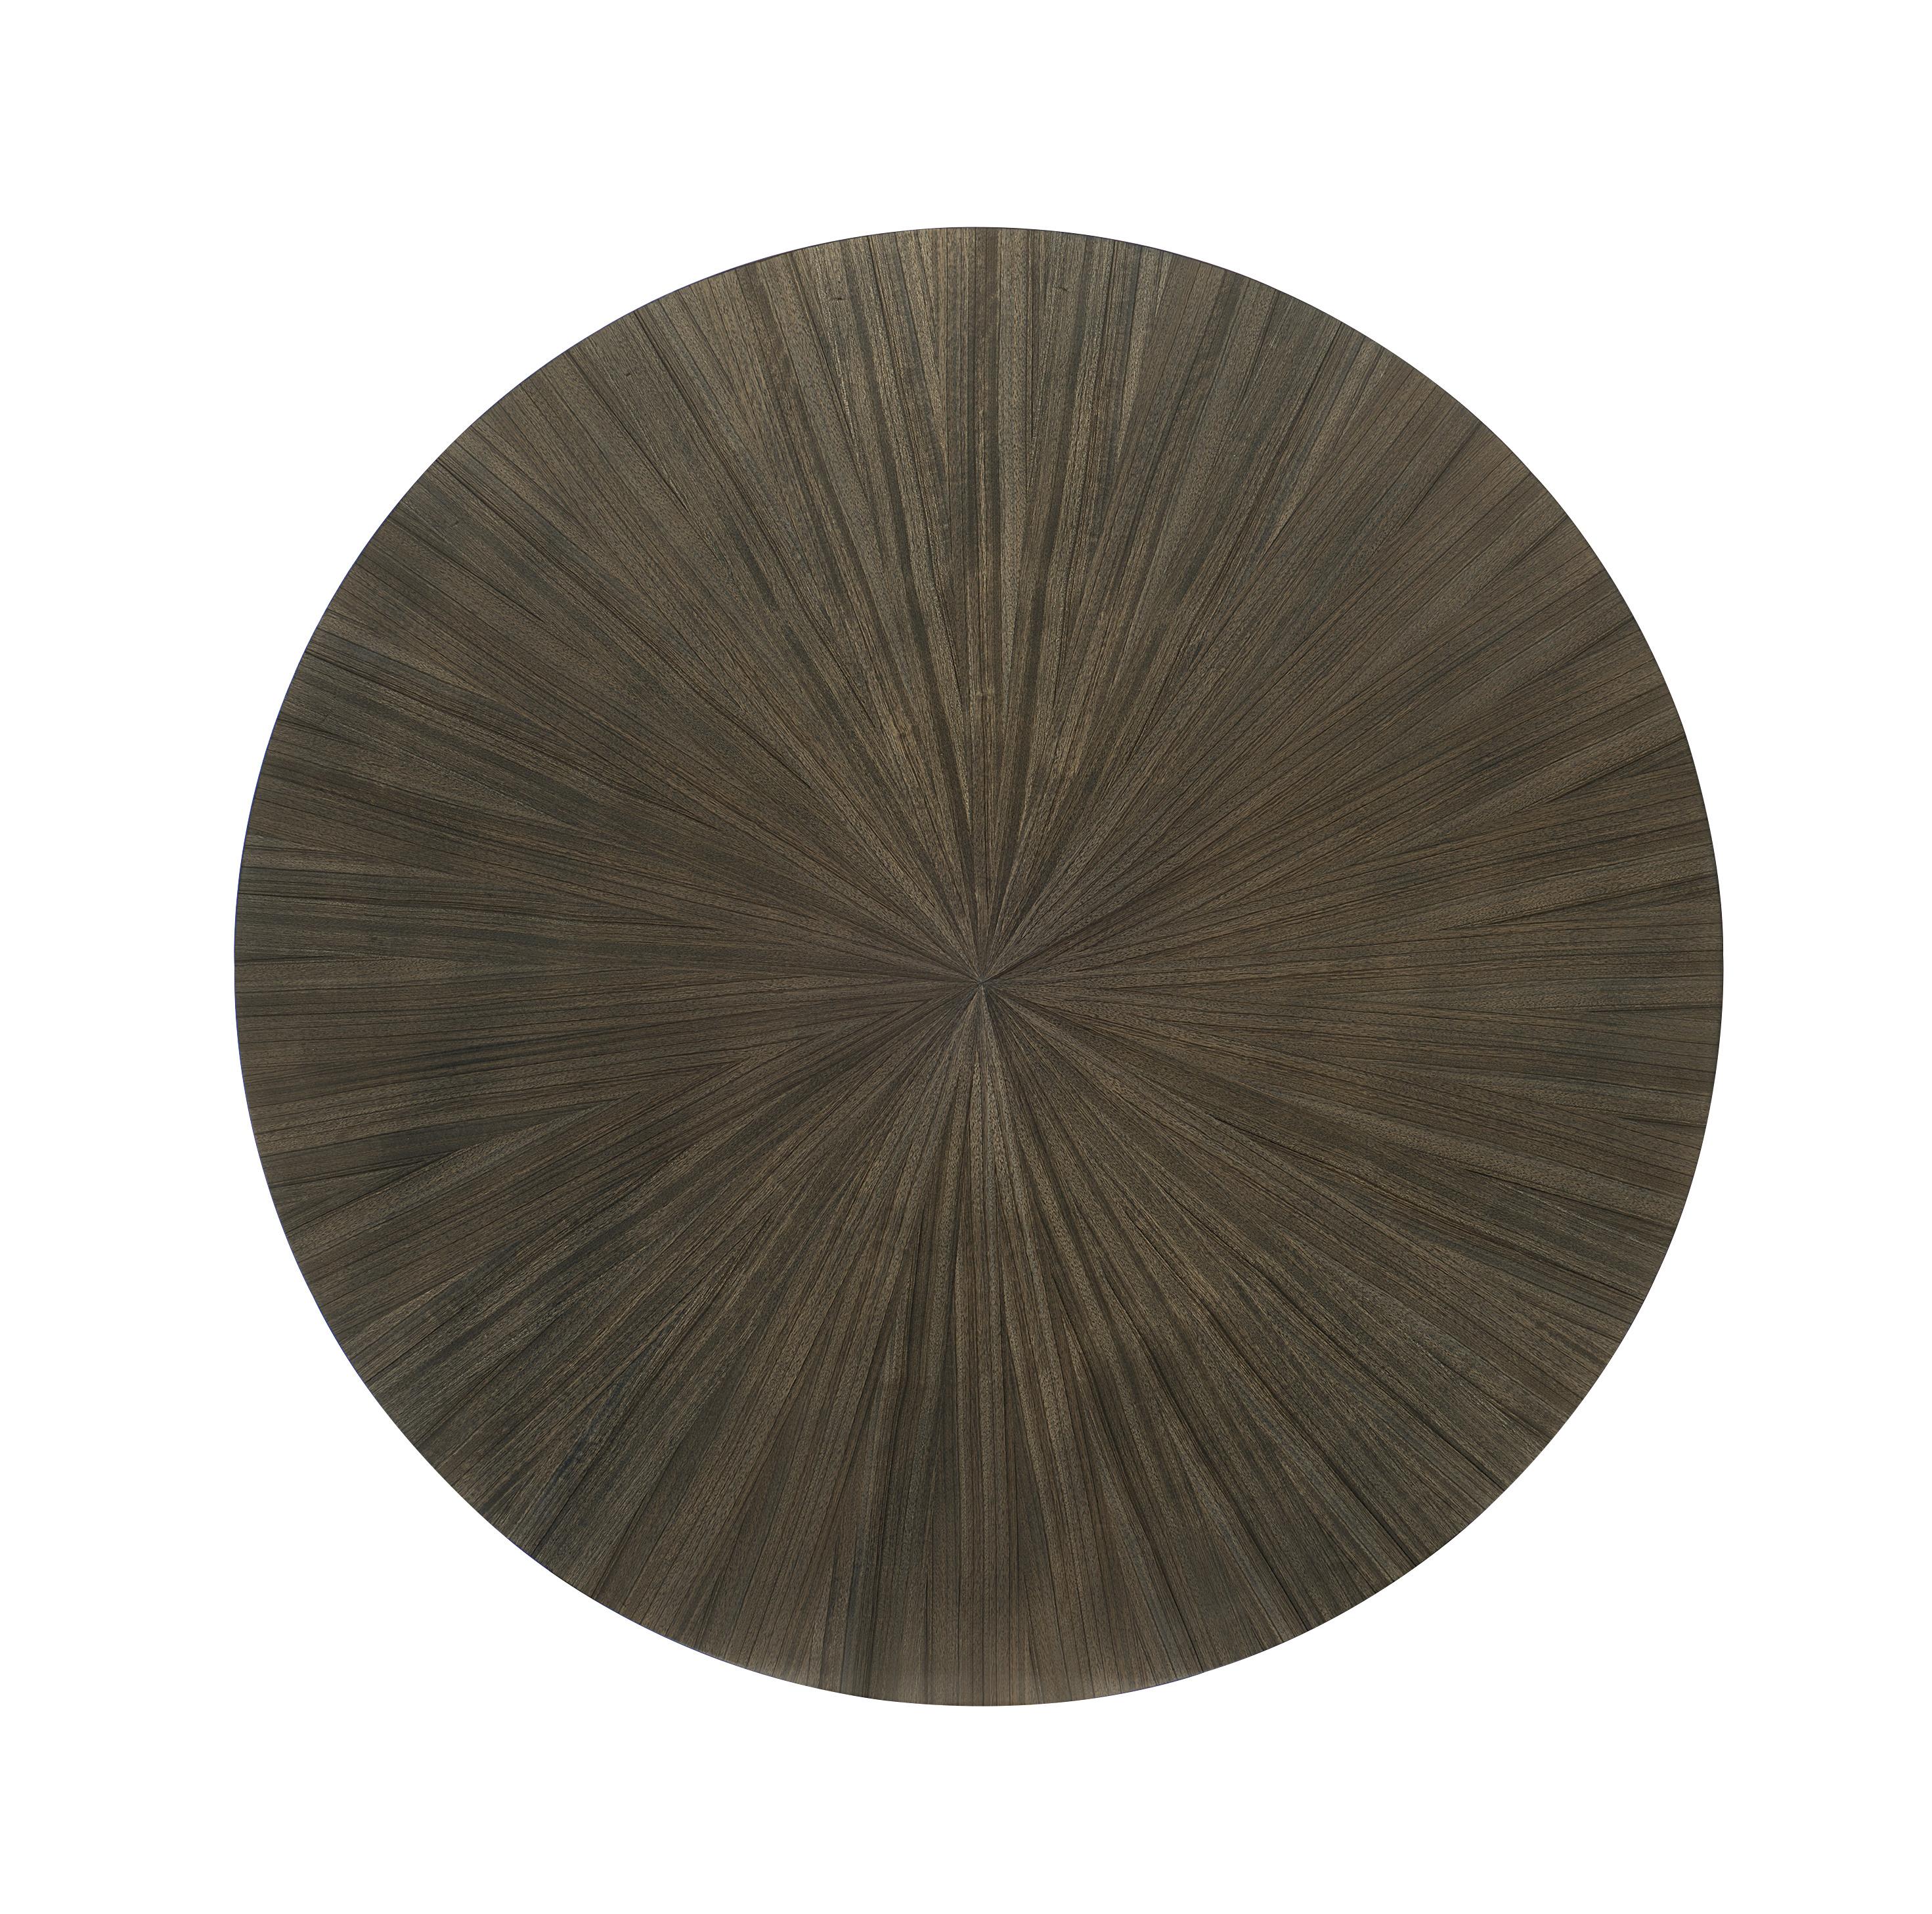 

    
Sepia & Harvest Bronze Finish Contemporary ROUND TABLE DISCUSSION by Caracole
